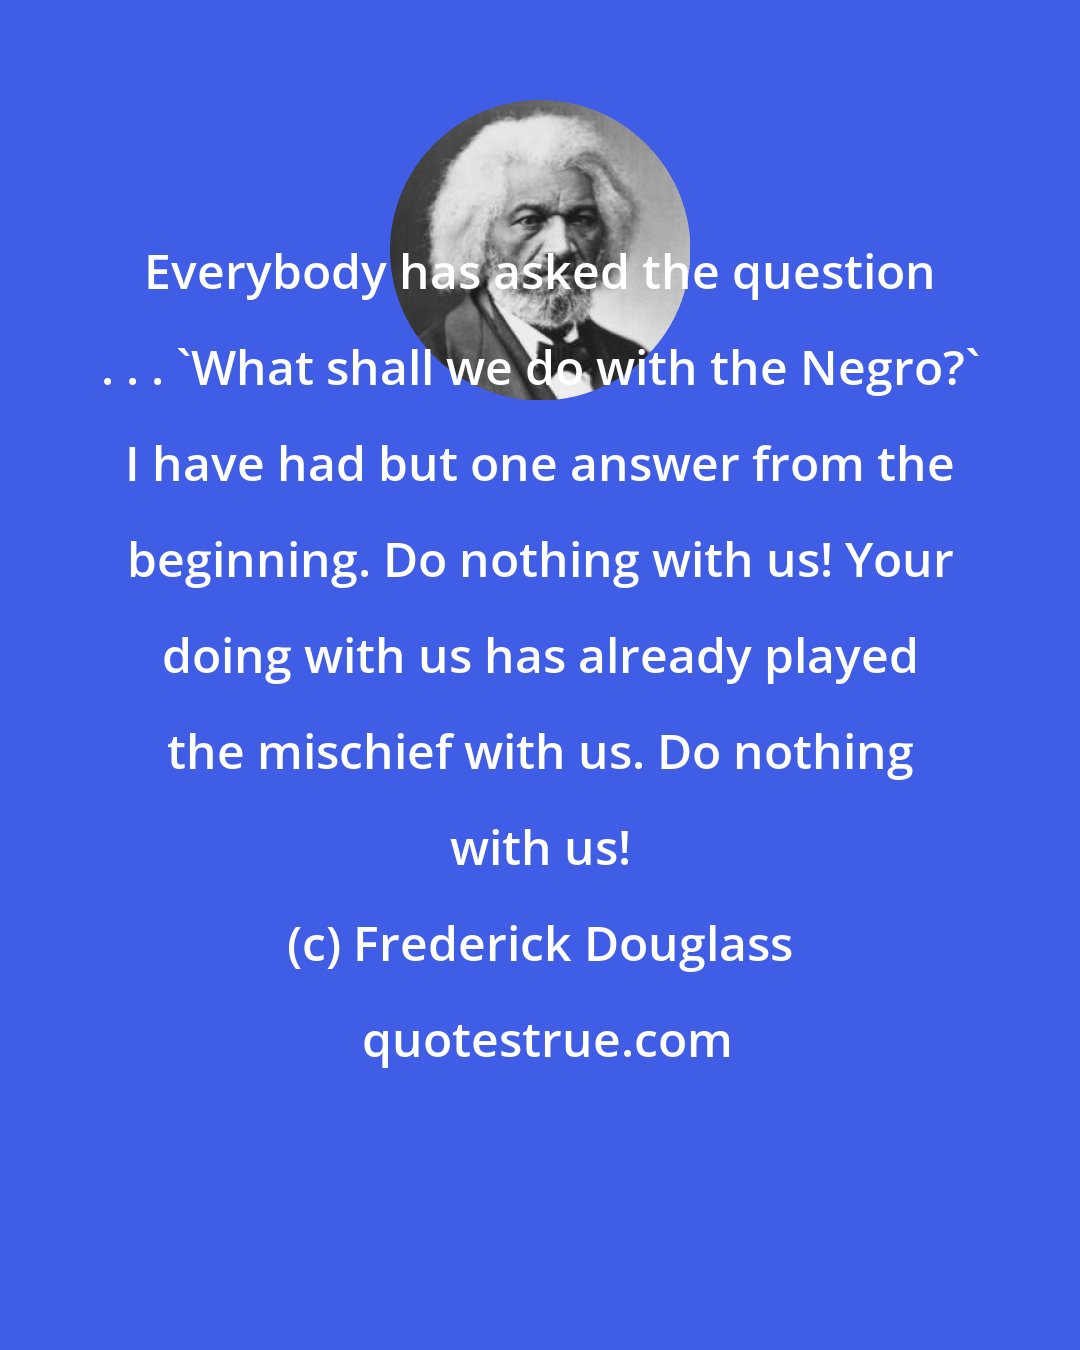 Frederick Douglass: Everybody has asked the question . . . 'What shall we do with the Negro?' I have had but one answer from the beginning. Do nothing with us! Your doing with us has already played the mischief with us. Do nothing with us!